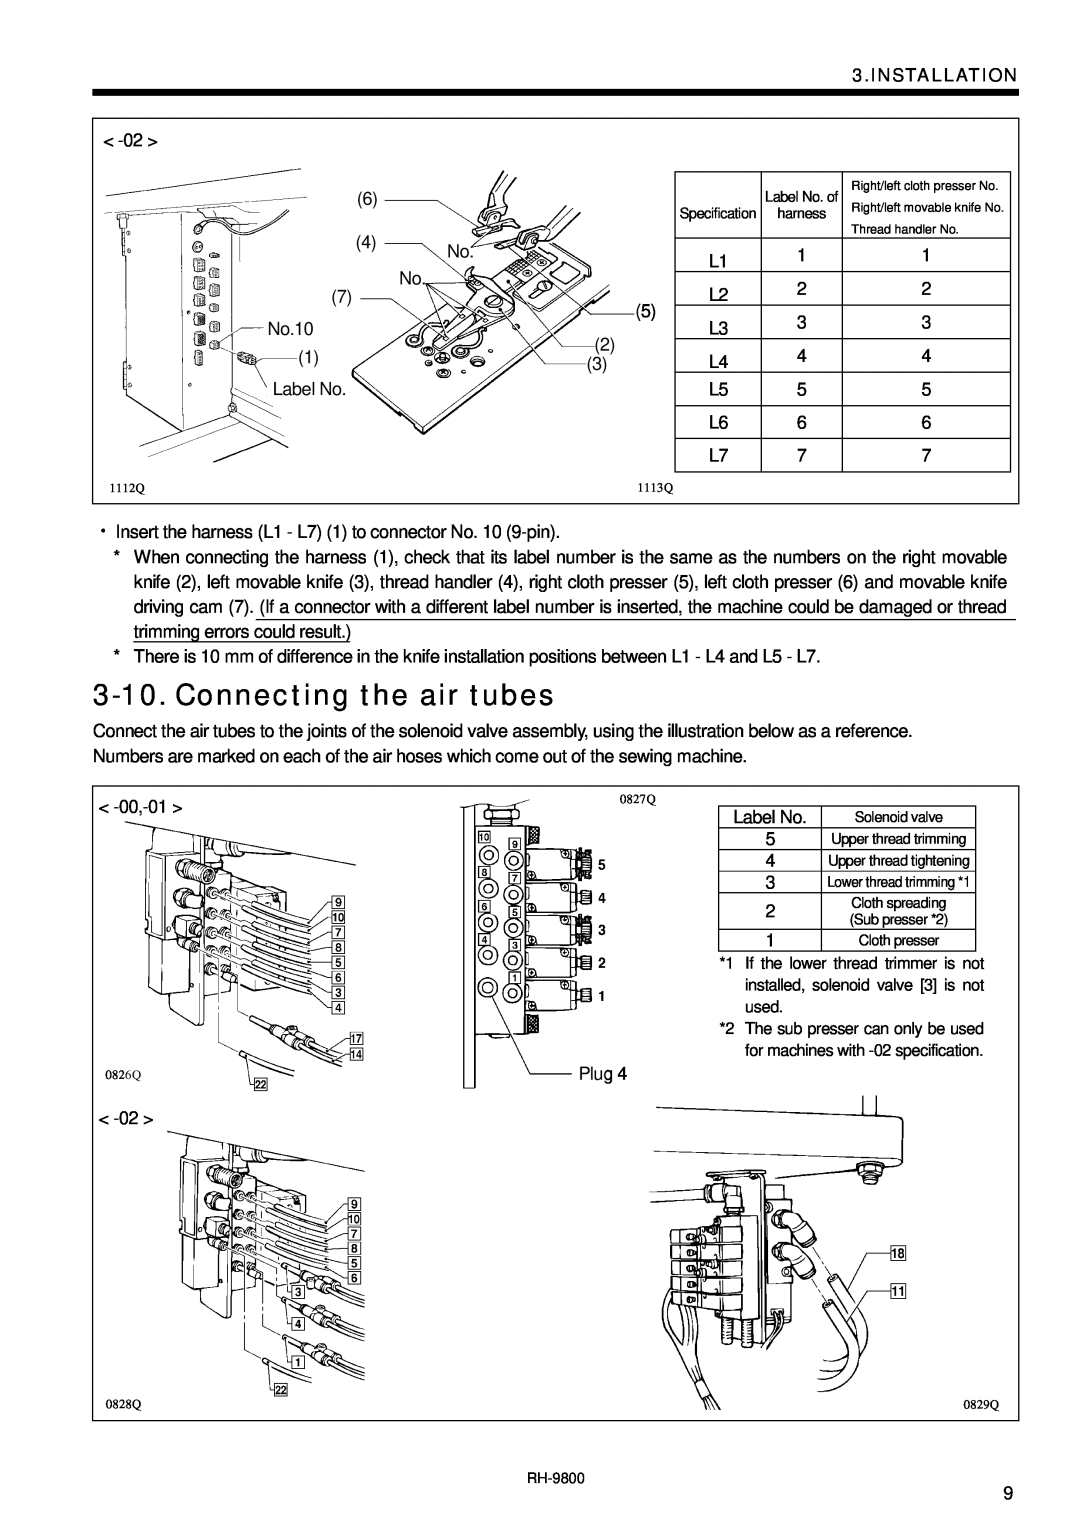 Brother DH4-B980 instruction manual Connecting the air tubes, Installation, harness, Sub presser *2 